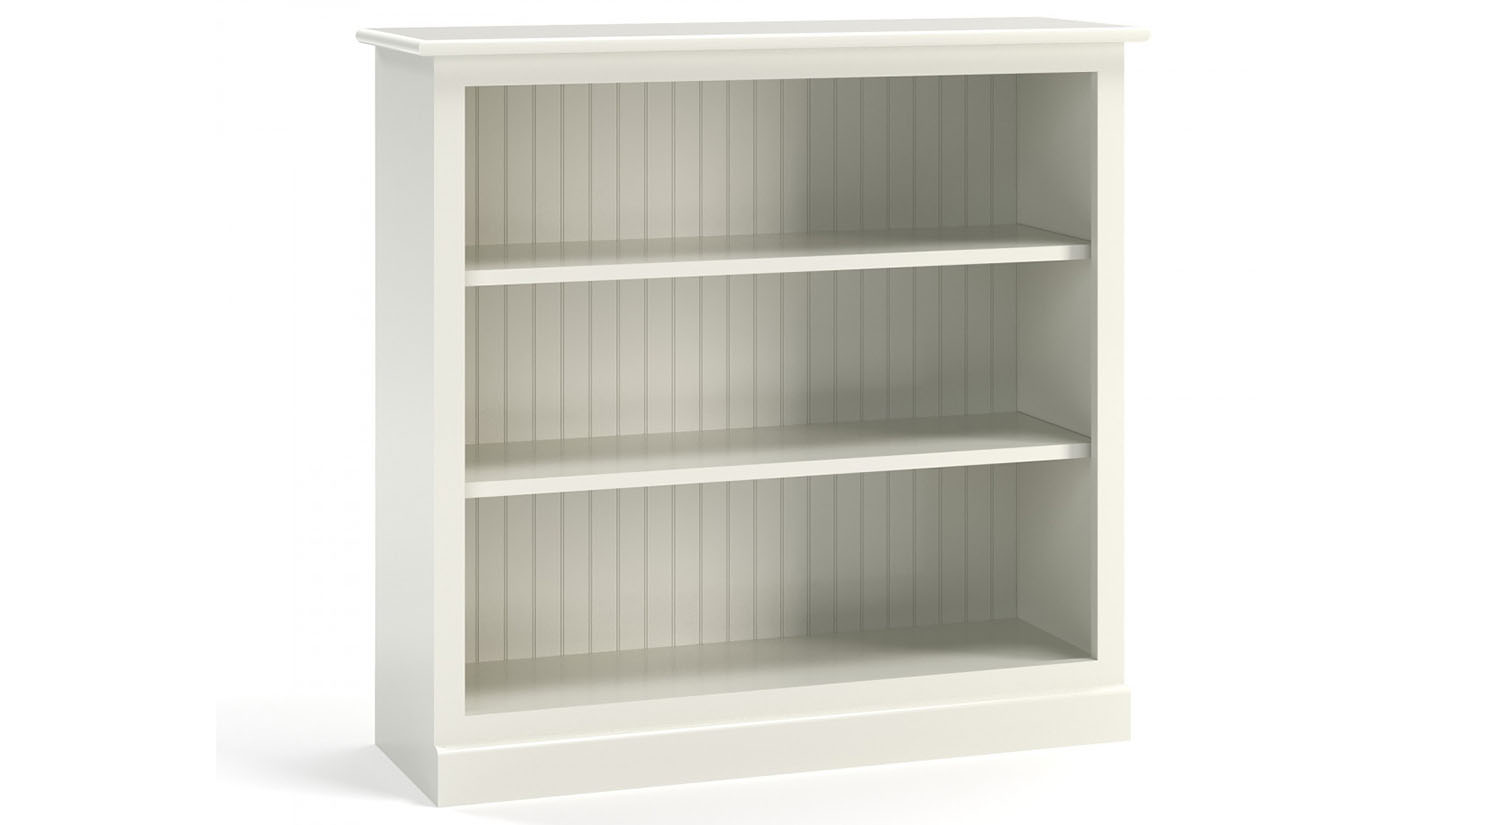 Details about   Shelf book shelf wall border foot cabinets white show original title 